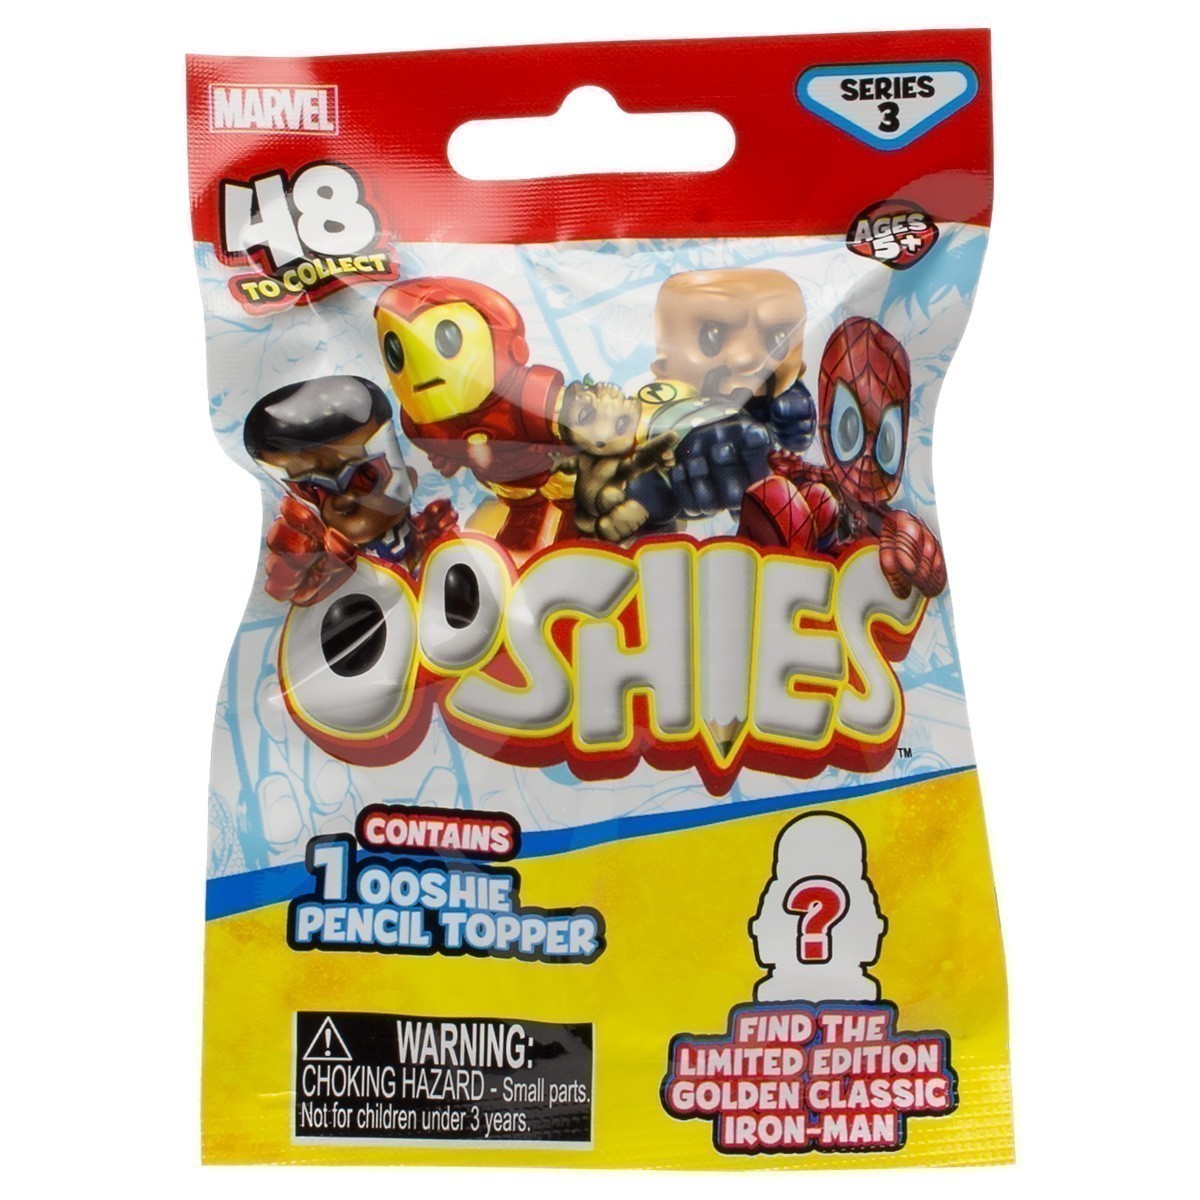 Ooshies Pencil Toppers - Series 3 - Marvel Blind Bag